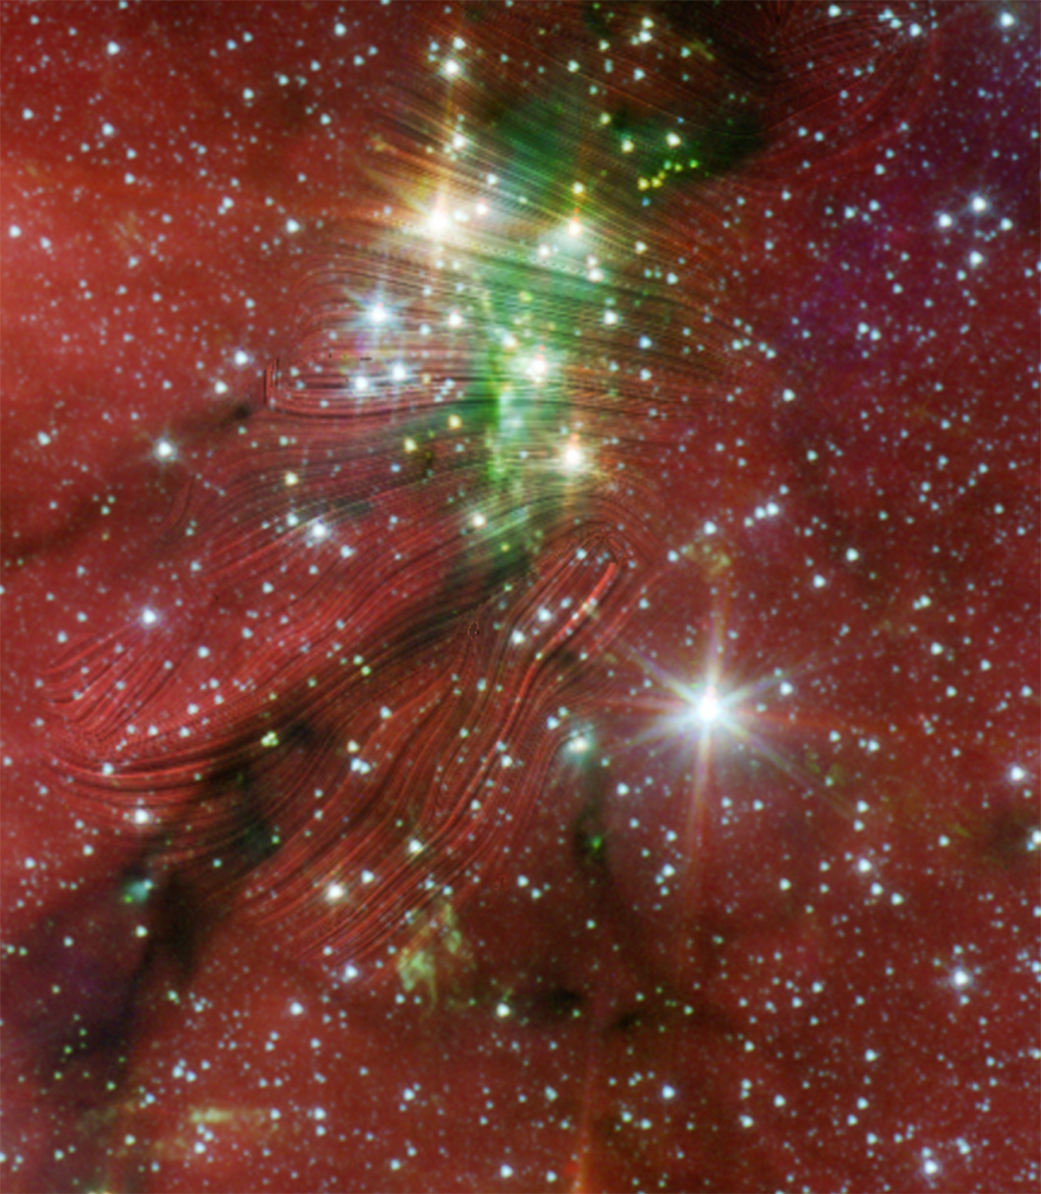 This view of a starry sky is bathed in red cloud-like structures. There is a bright grouping of stars just above and to the left of center in the image. These stars are bright white with large diffraction spikes, long lines like an asterisk over each star. The background changes to an electric green behind the concentration of stars. Lines in the image show where magnetic fields run. They run left to right over the main grouping of stars, but gradually change to be tilted from bottom left up to the right just below the grouping of stars.